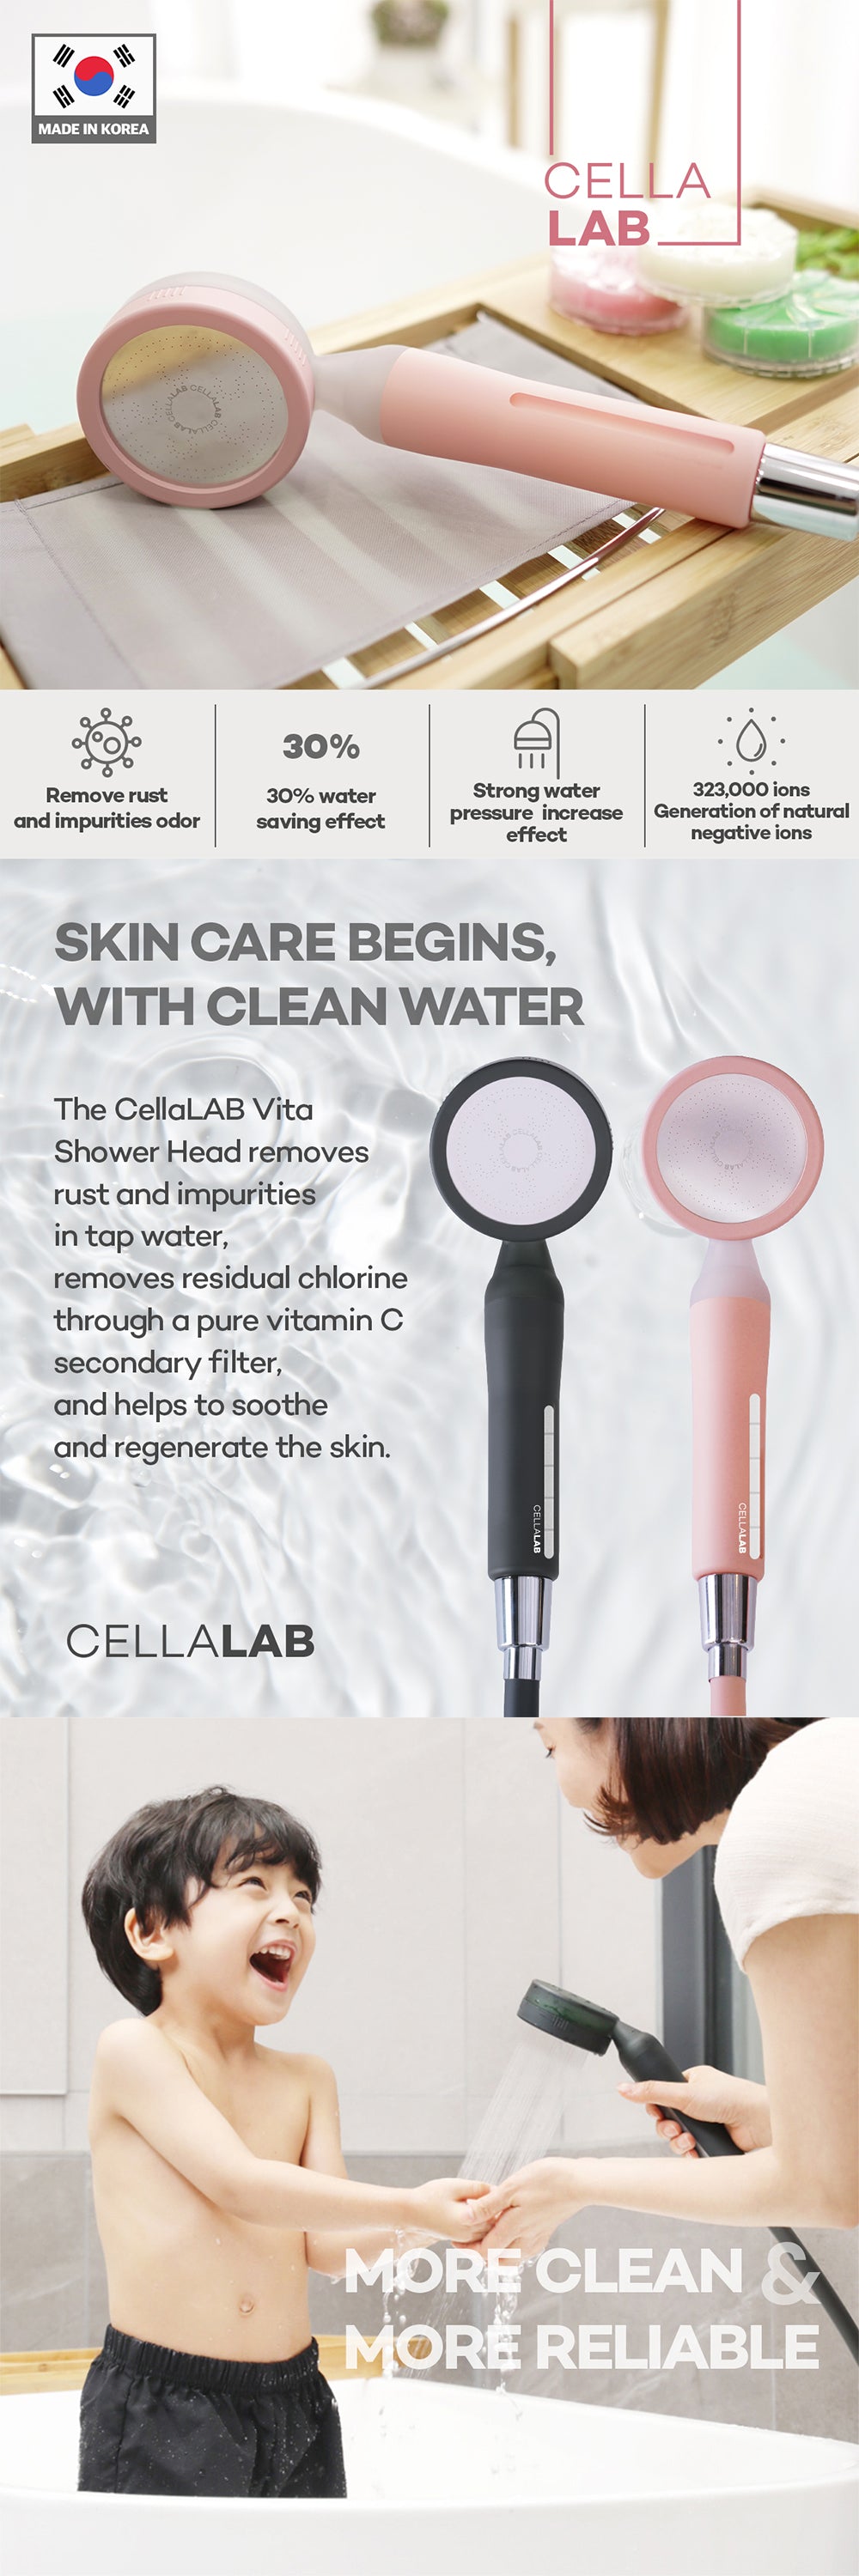 CellaLAB Shower Head Clean Water Skin Care